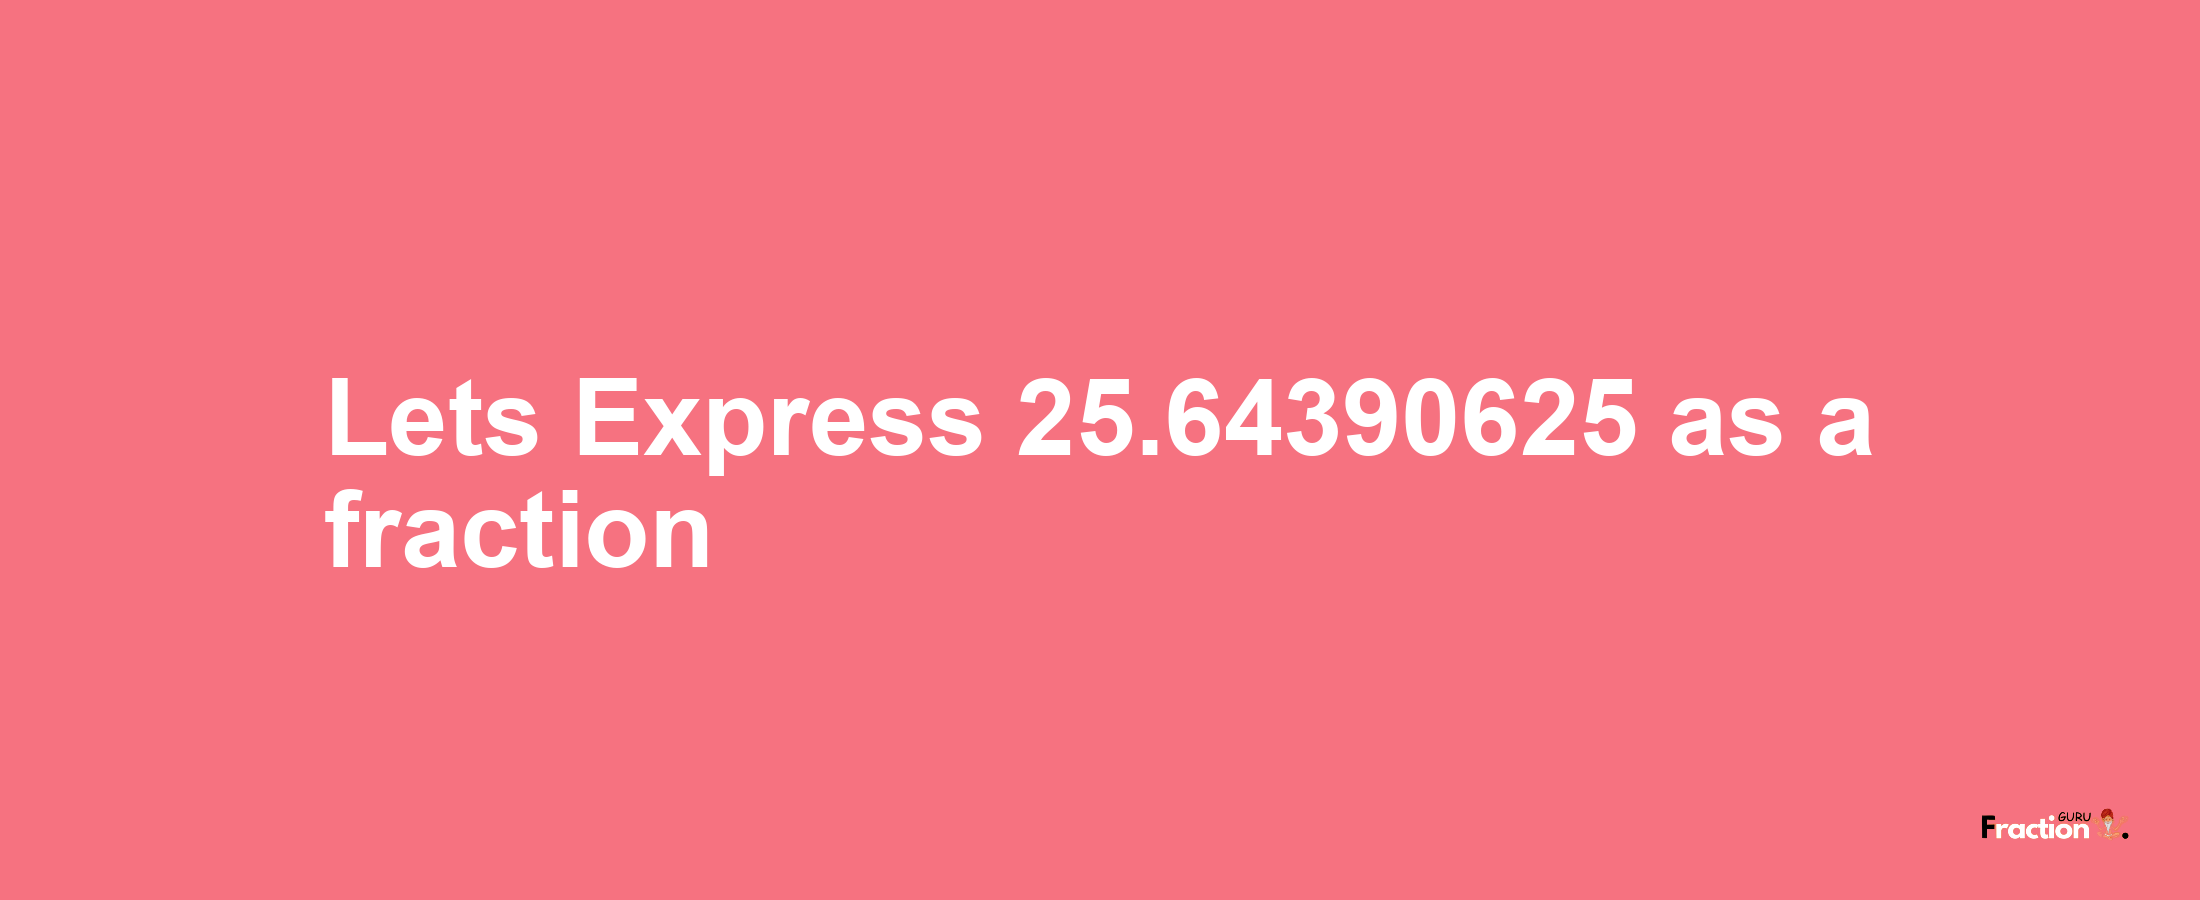 Lets Express 25.64390625 as afraction